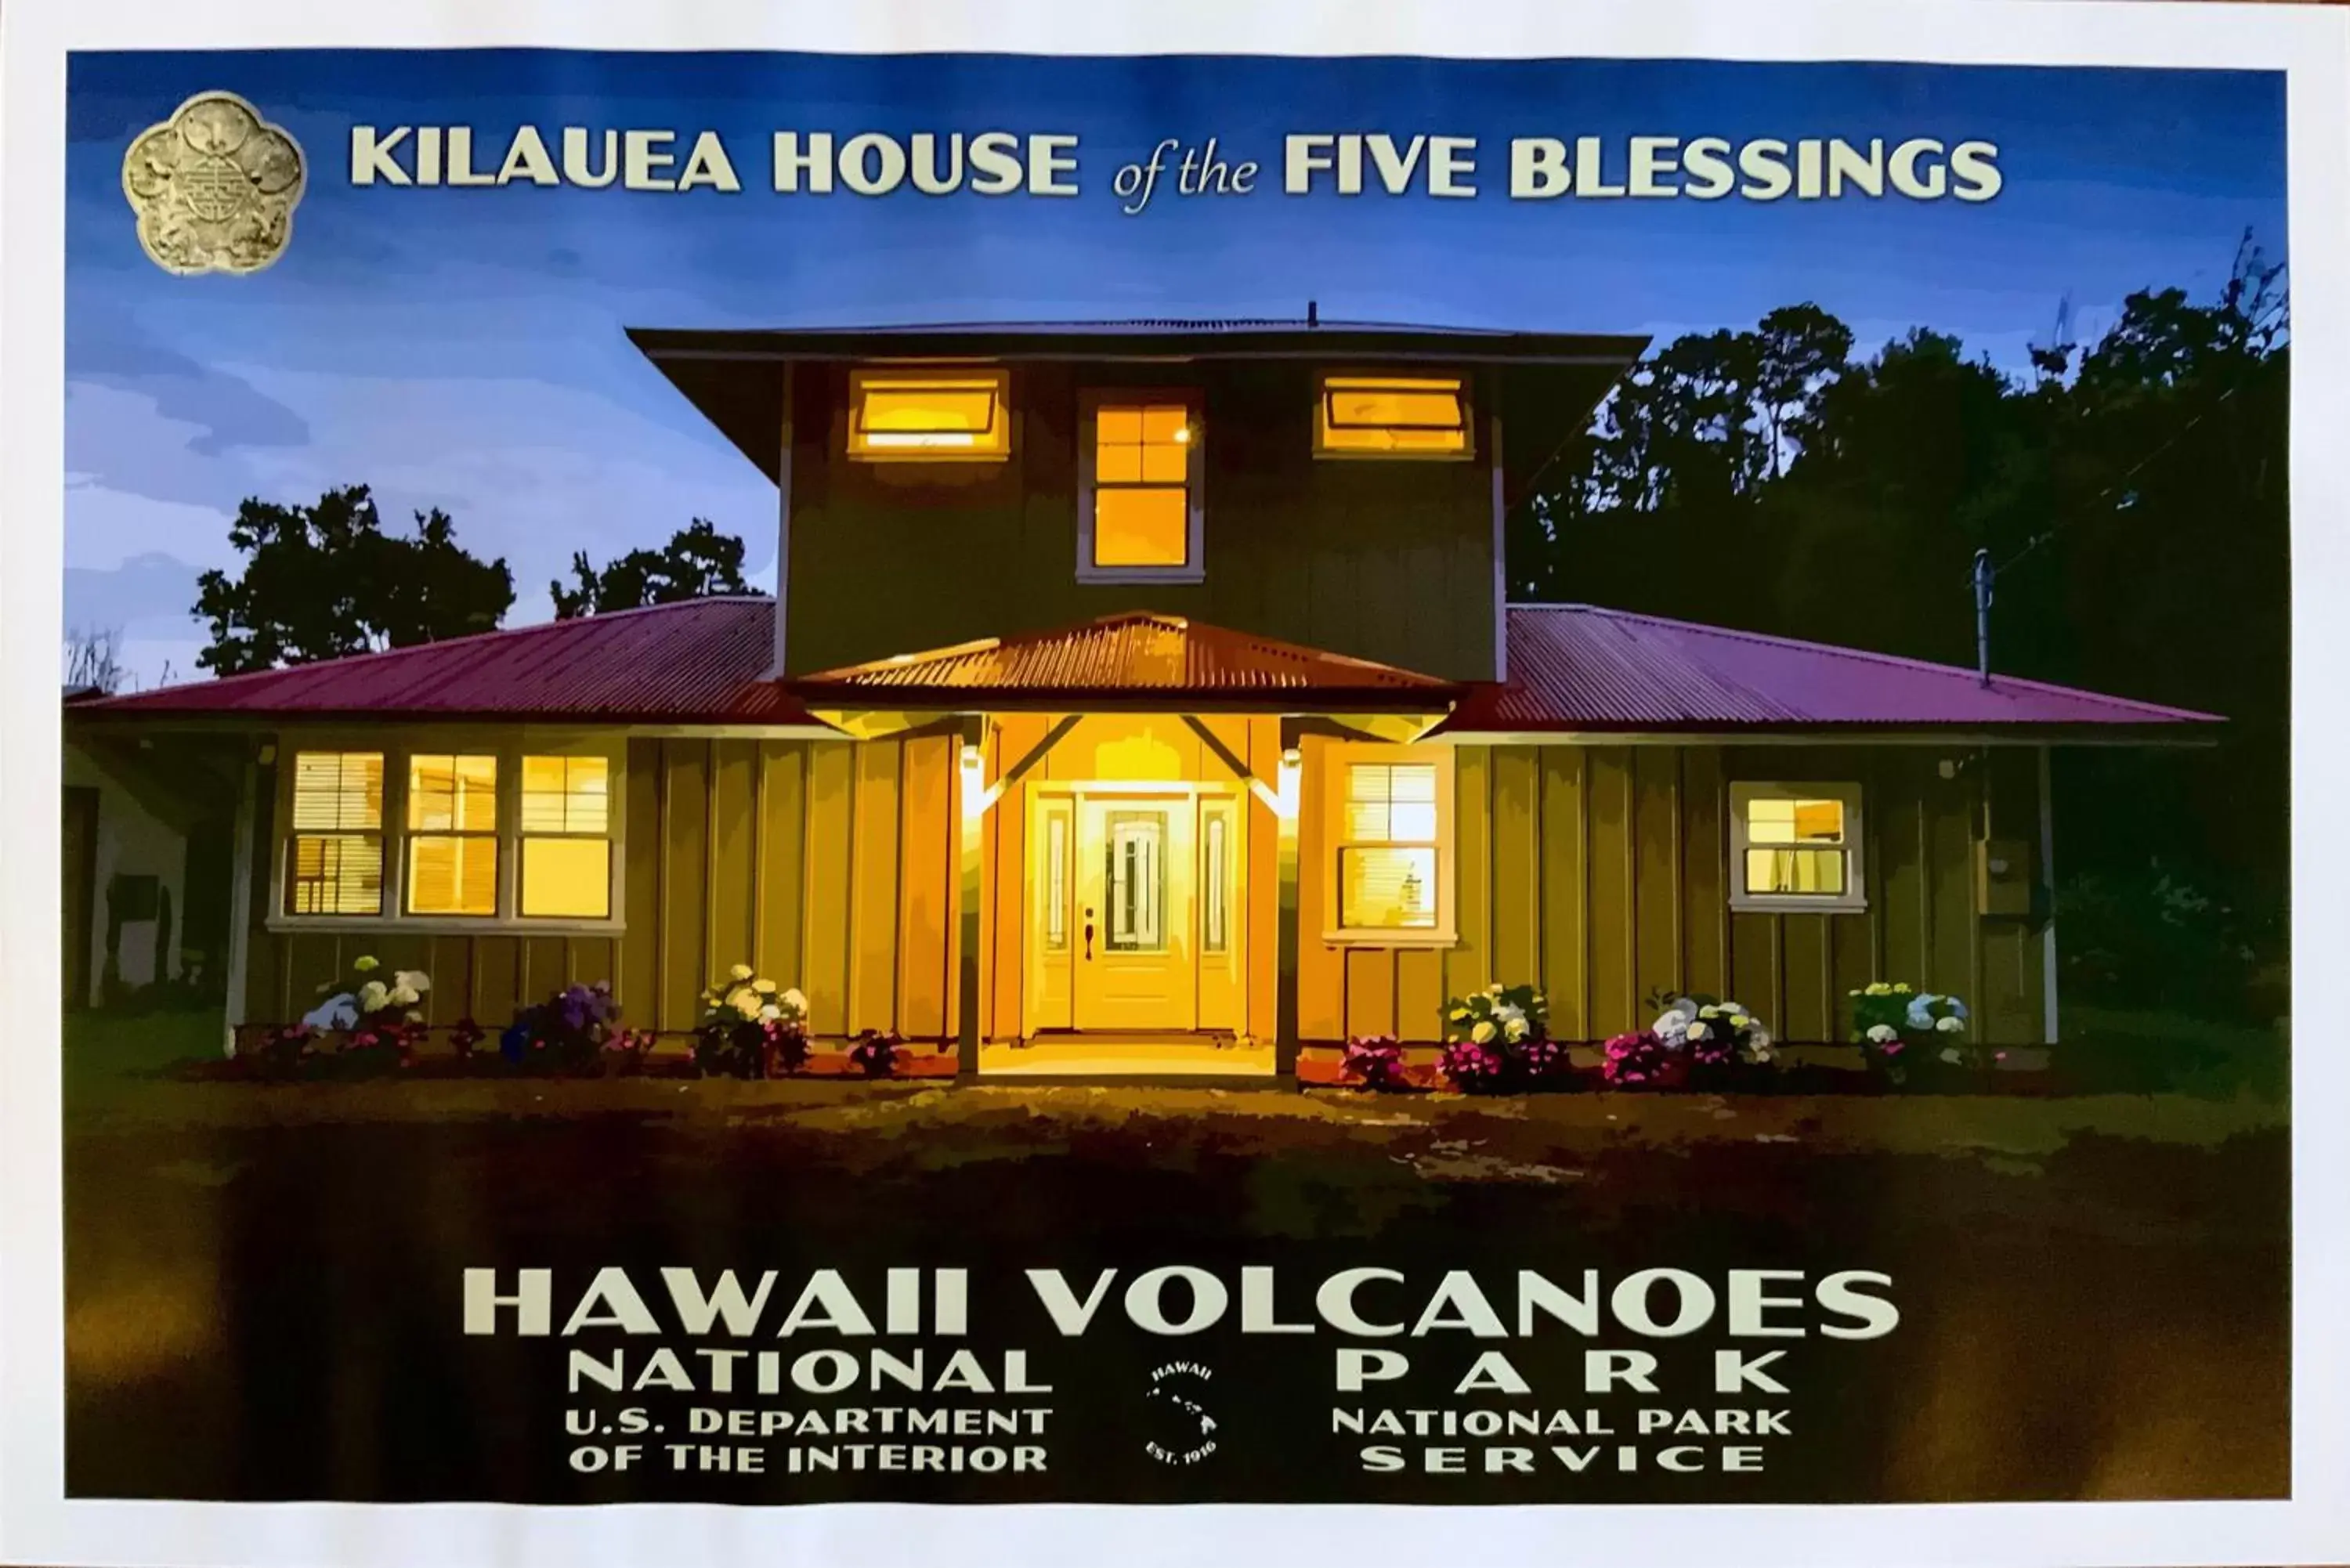 Property Building in Kilauea House